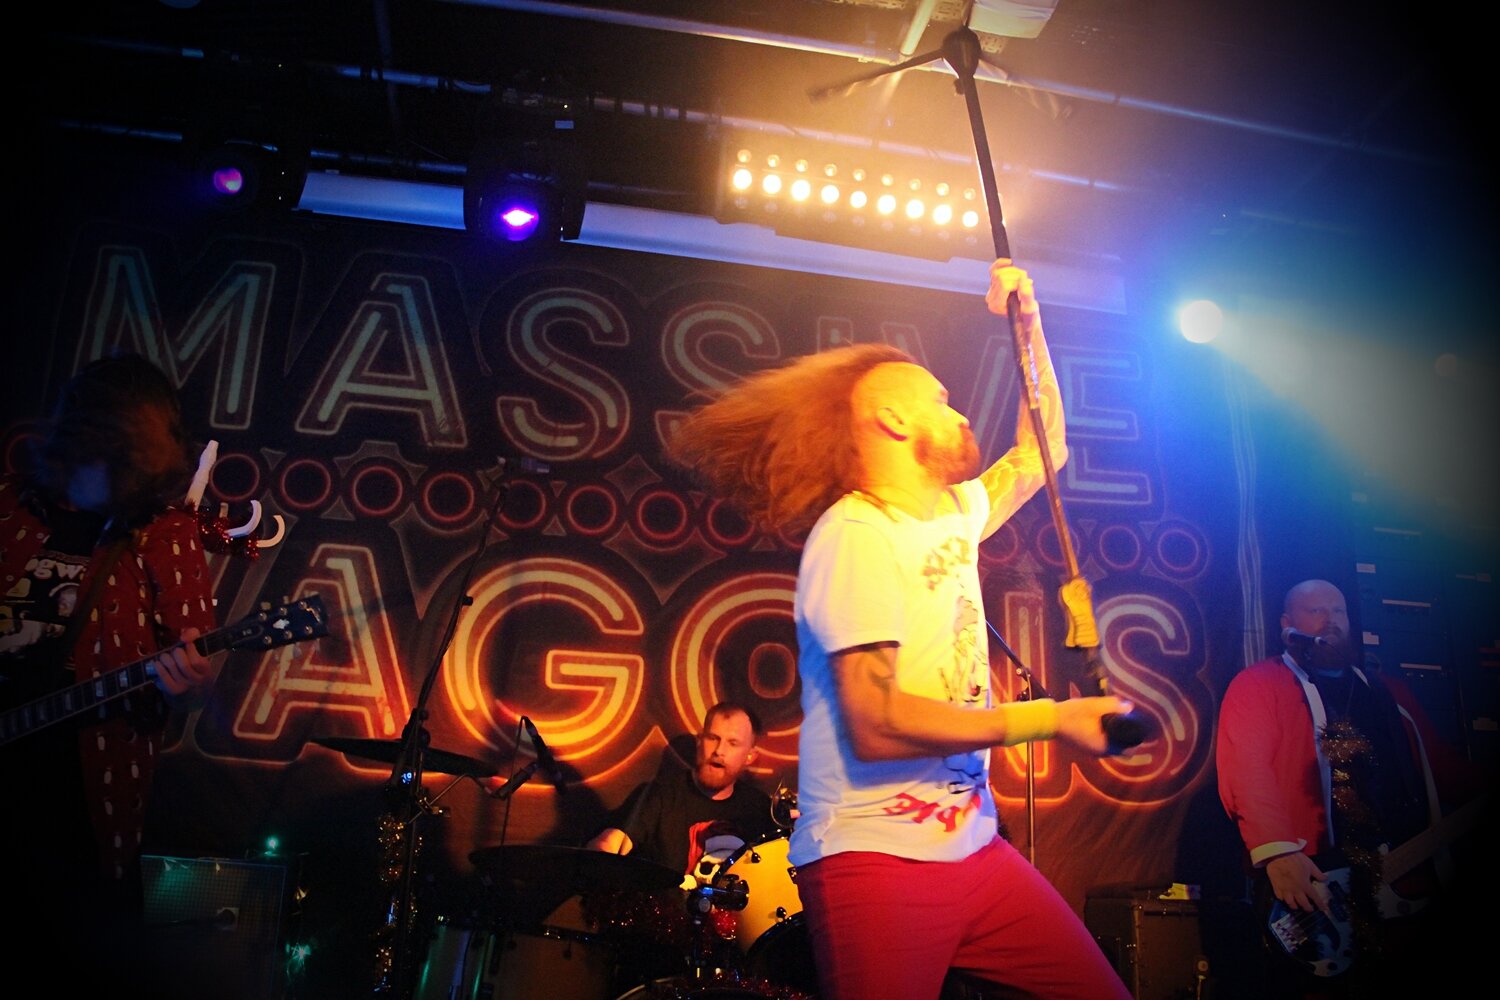 Massive Wagons at Gorilla in Manchester on December 7th 2019 ©Gregg Howarth